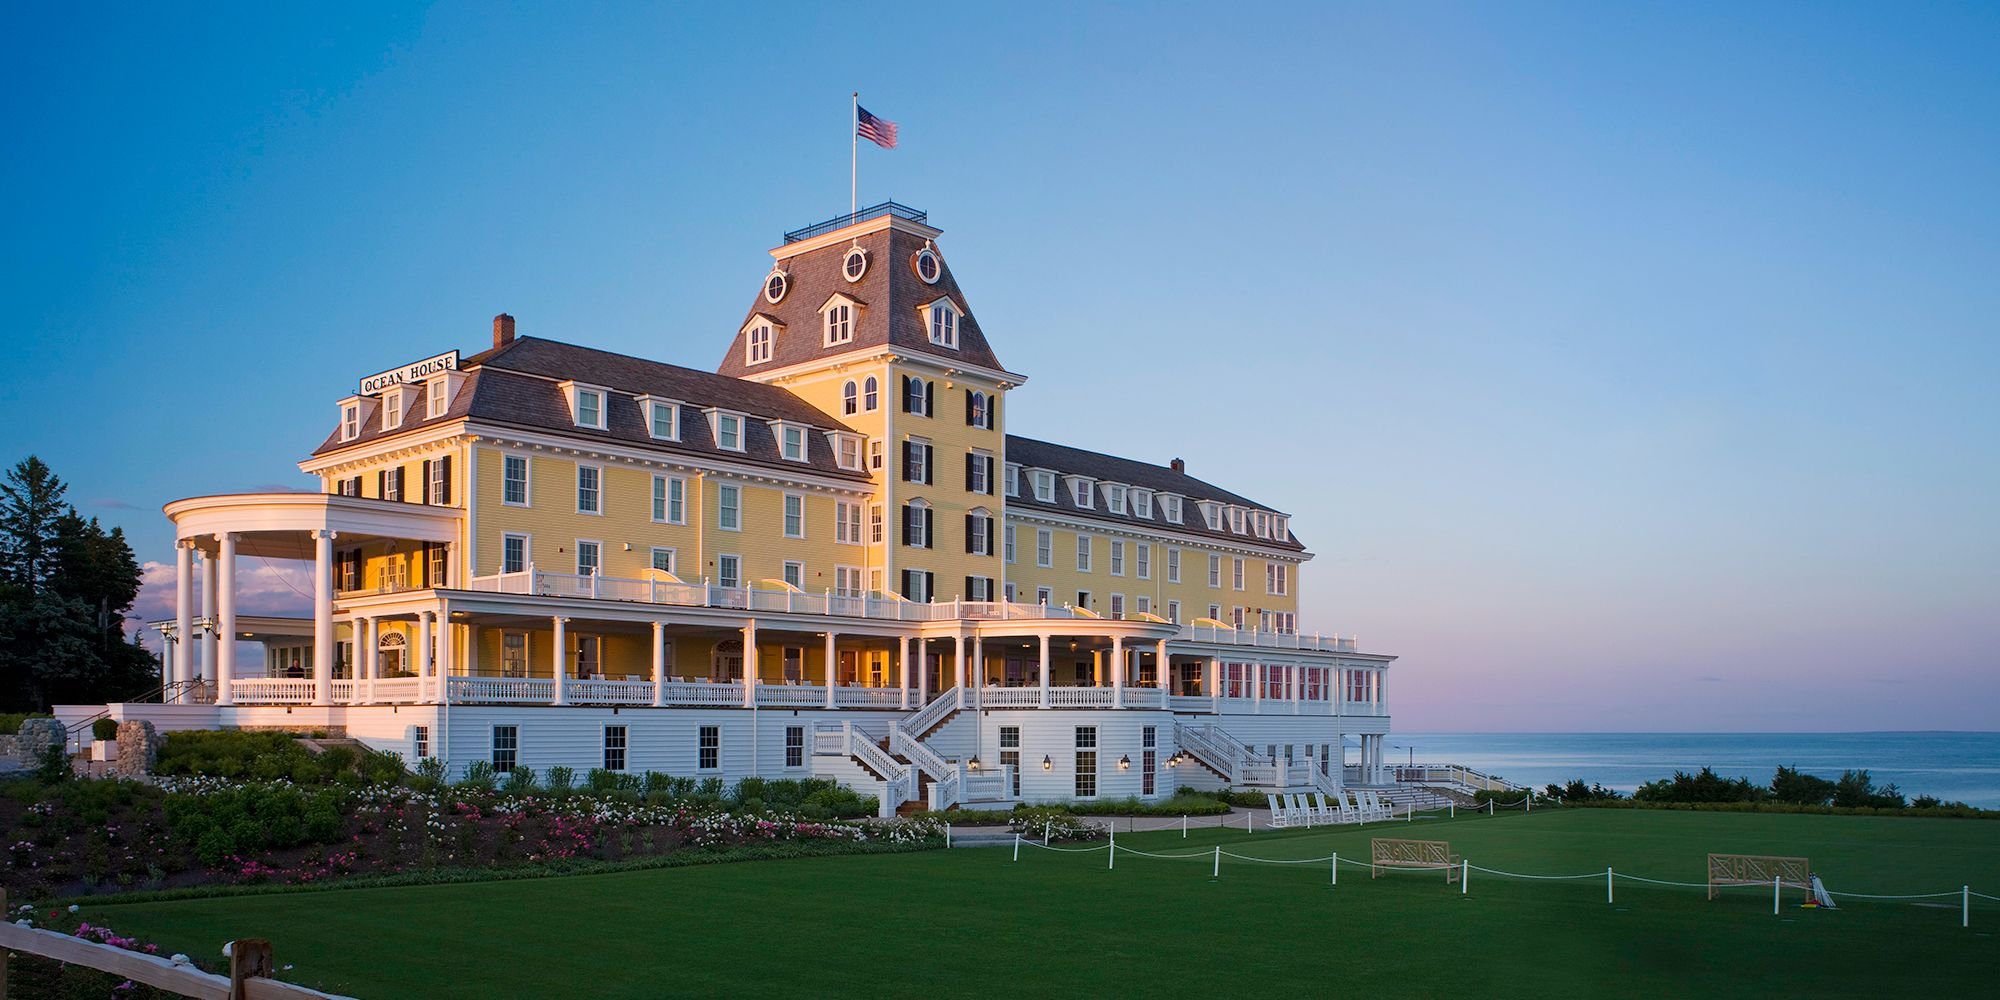 The most historic hotel in every state